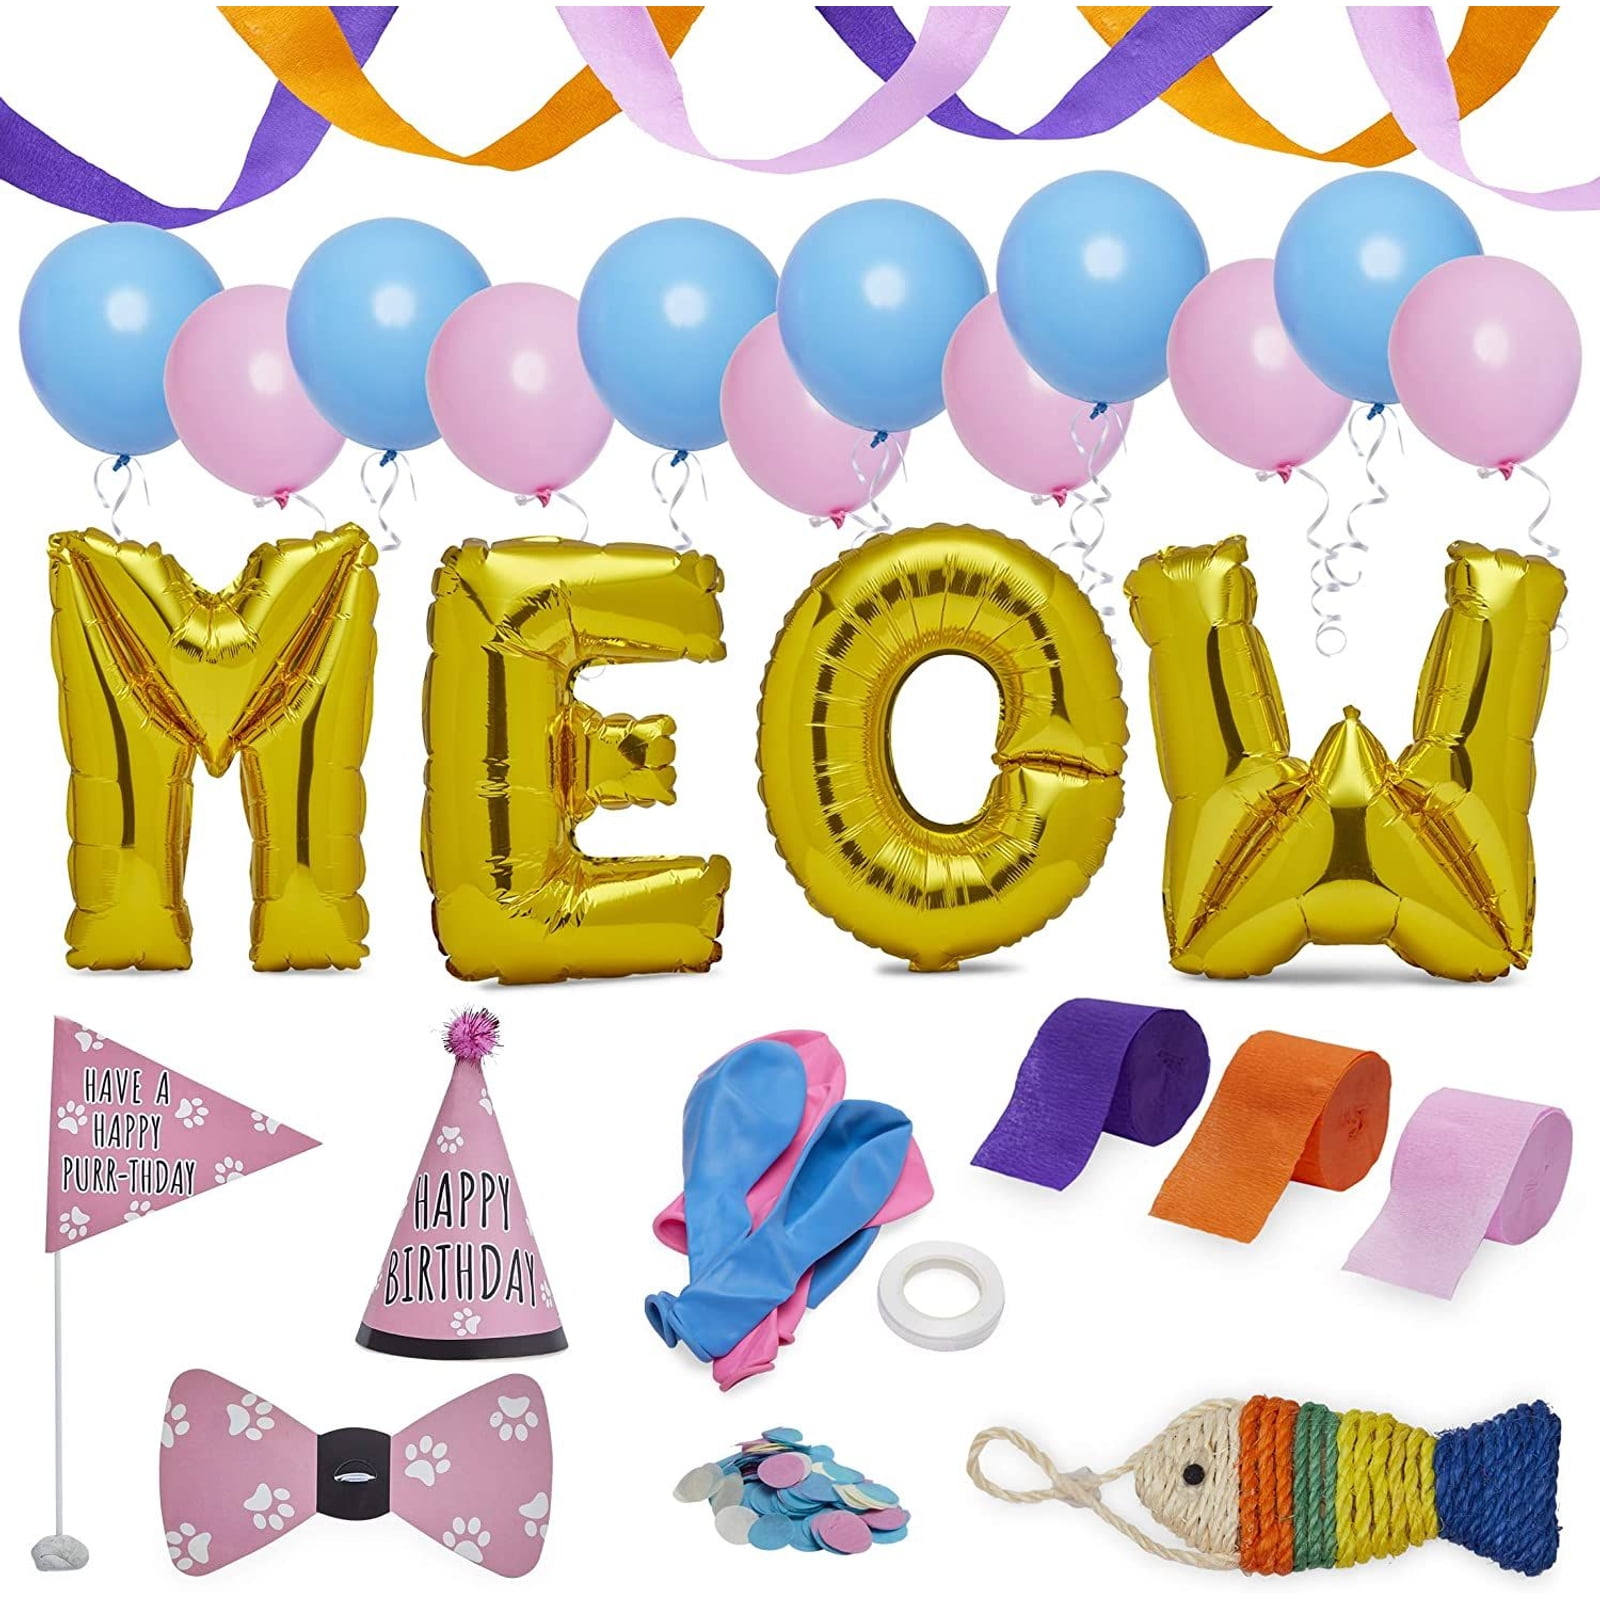 Cat Party Kit 1 For 8 to 16 ChildrenKids Cat Party TablewareKitten Party 